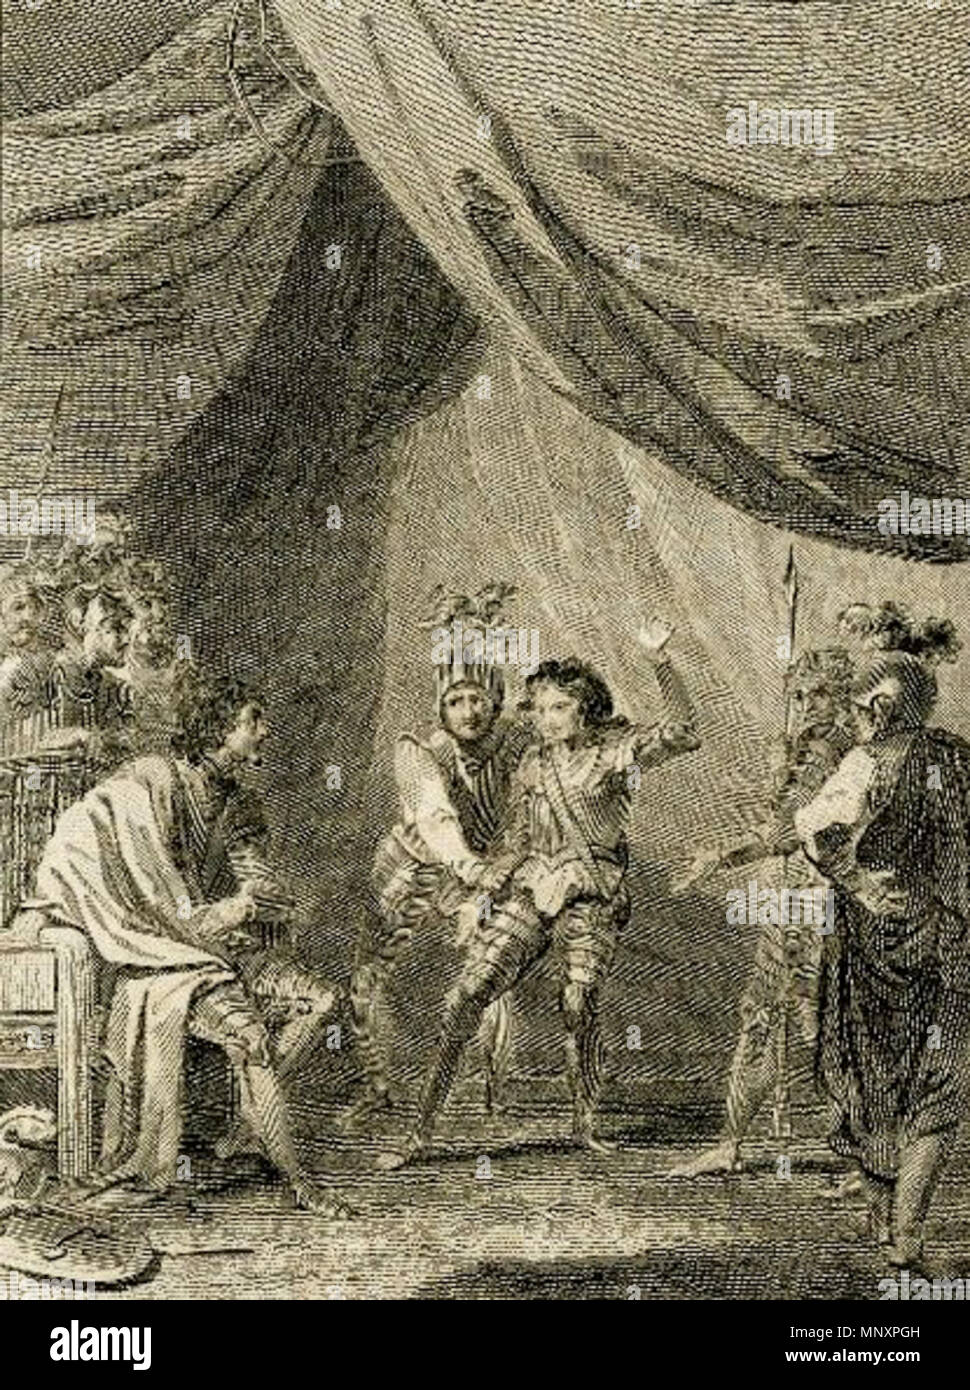 . English: Edward IV seated at left in a tent, the prince dragged before him by a guard. 1811. after Robert Smirke 1179 The Prince of Wales brought before Edward IV Stock Photo